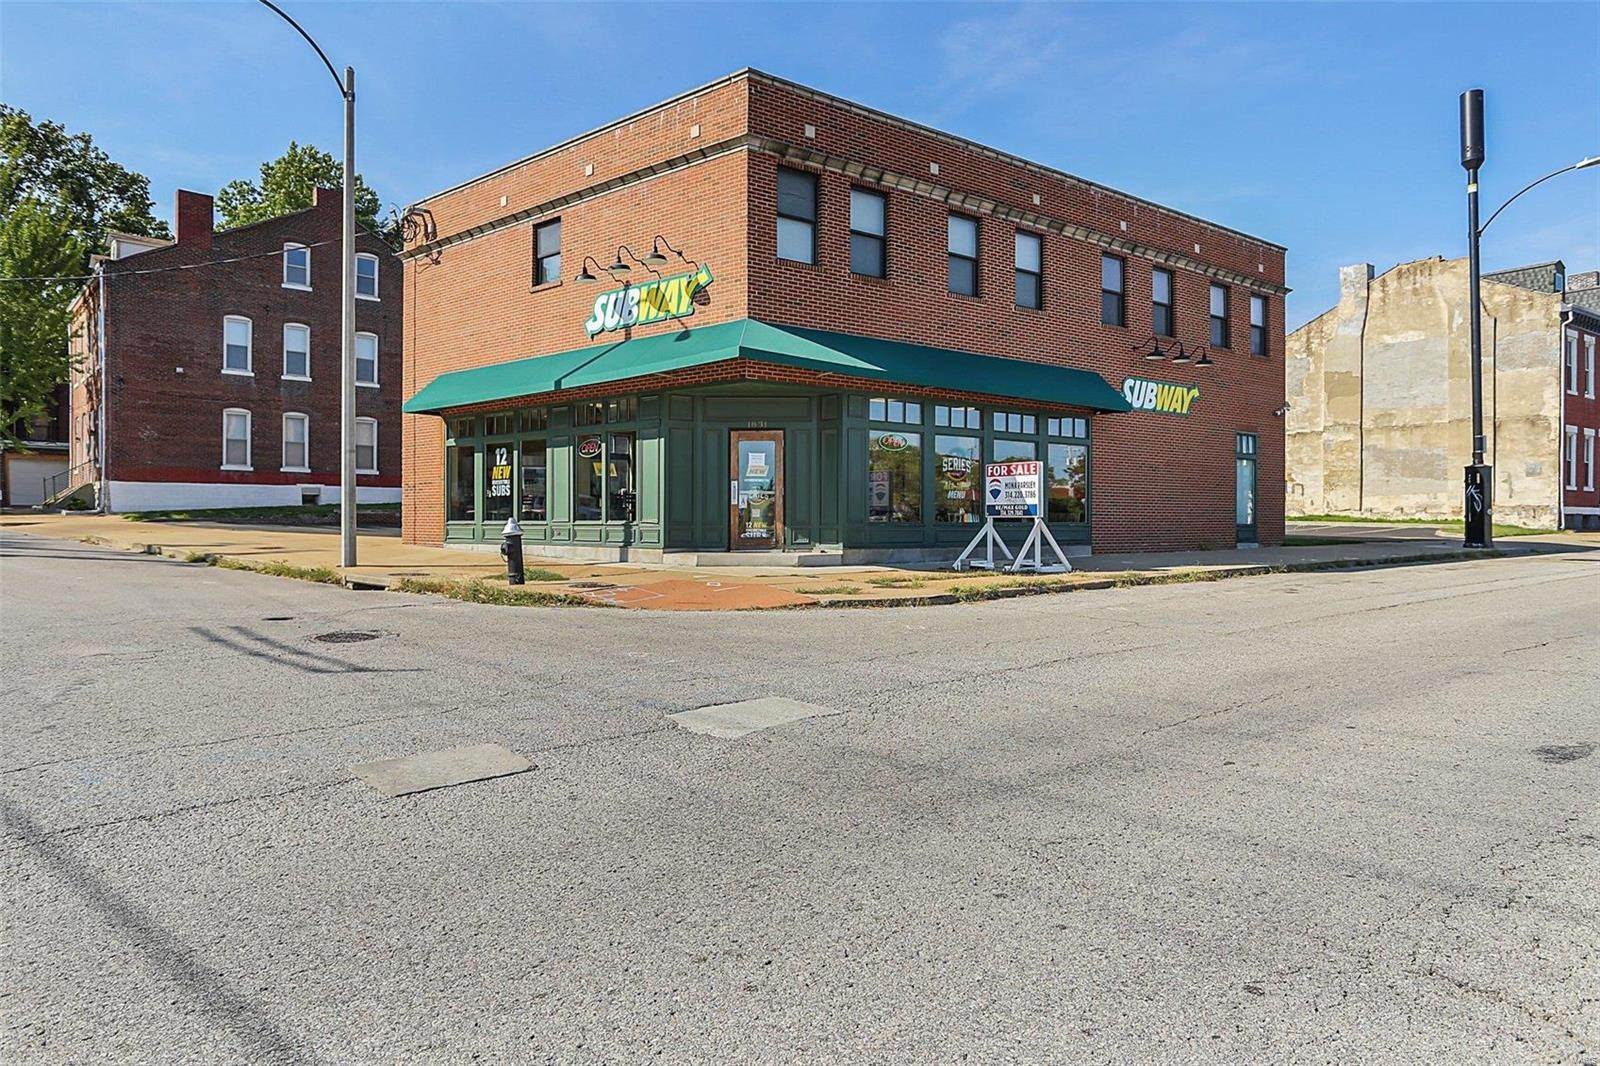 Property for Sale at 1831 S 7th Street St. Louis, Missouri 63104 United States